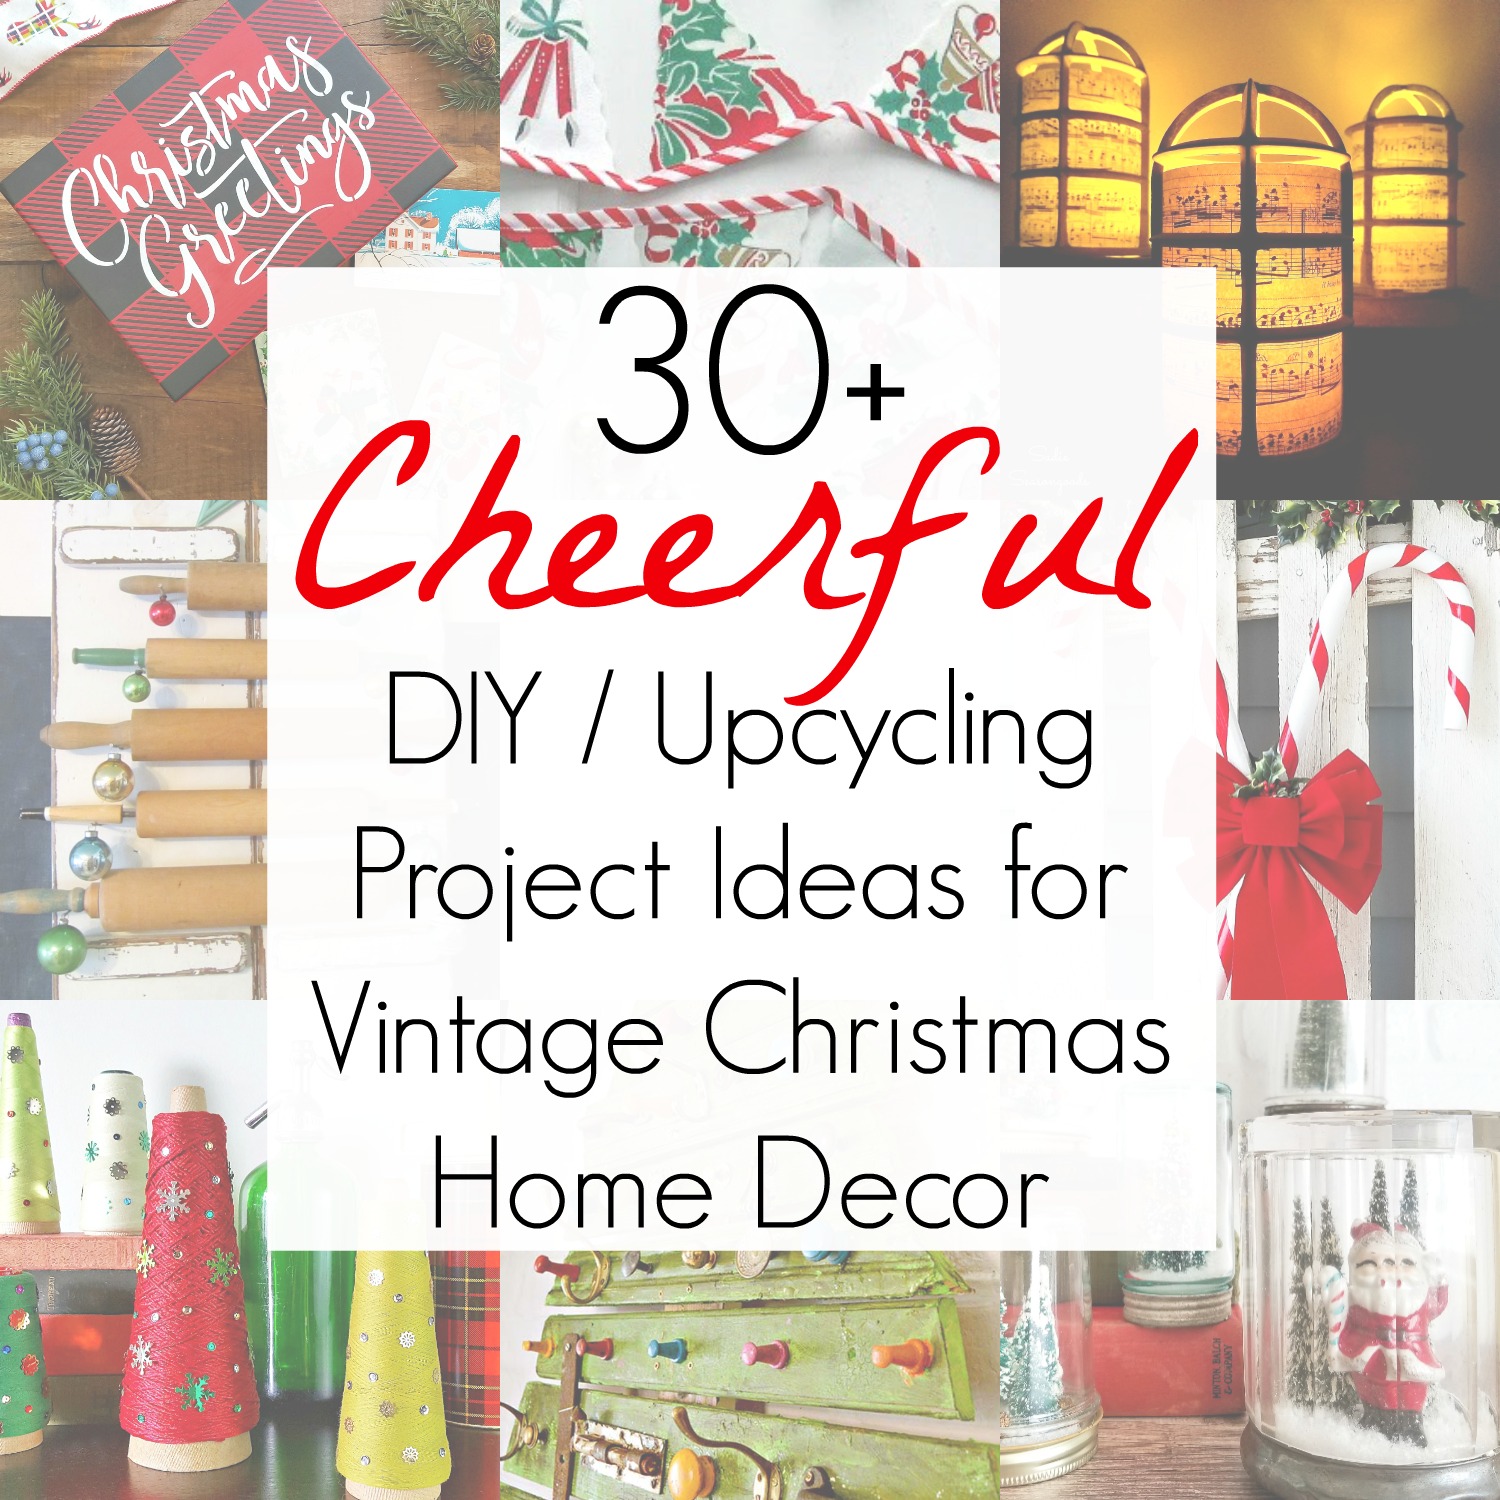 Upcycling Ideas and DIY / Repurposing Projects by Sadie Seasongoods